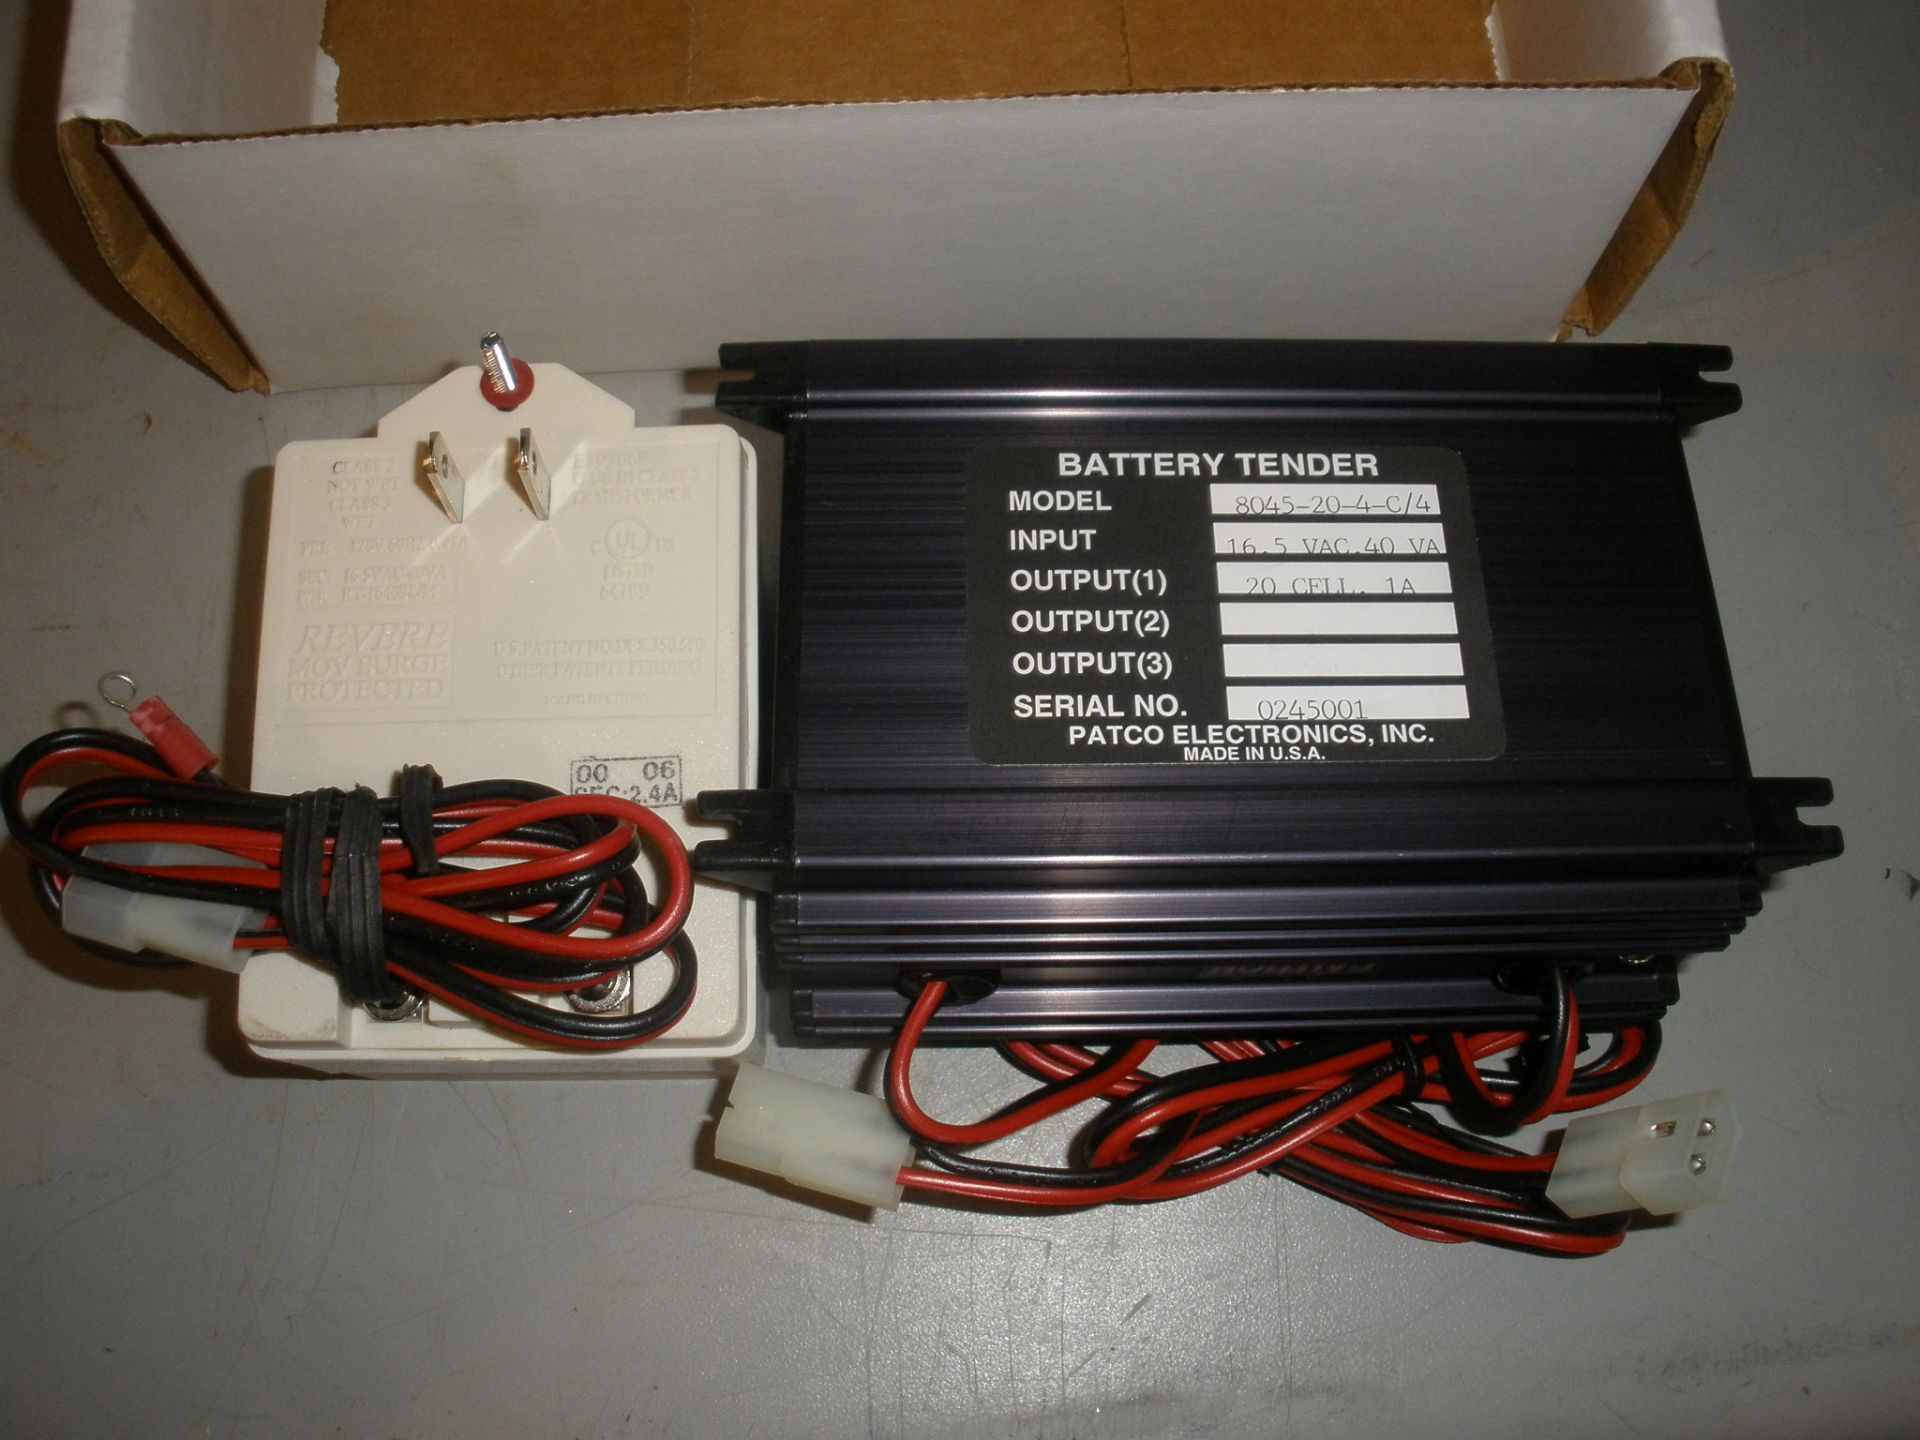 Patco Battery Tender 150-6/750 150-24